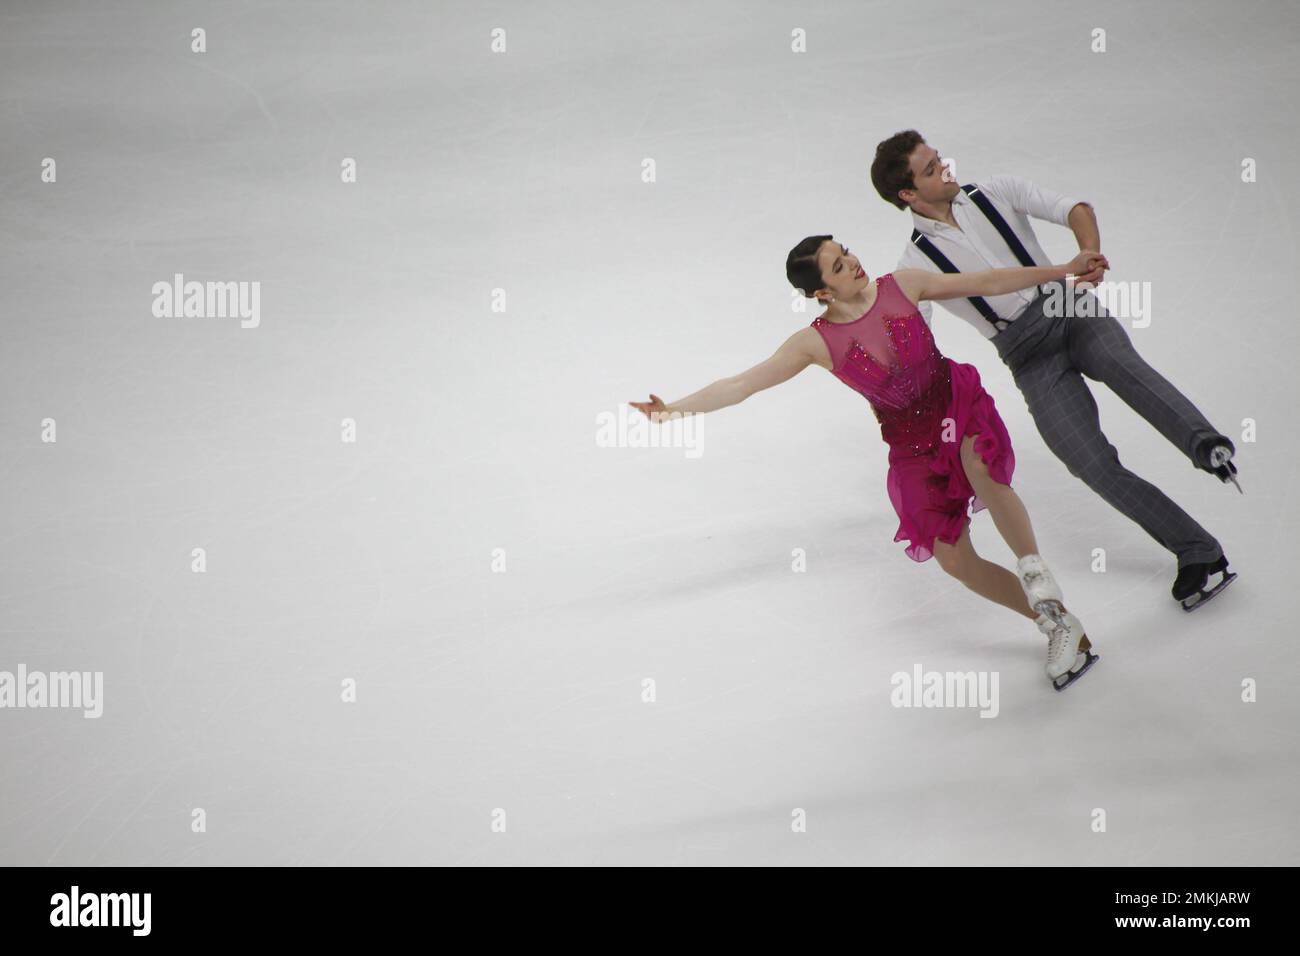 San Jose, CA, USA. 28th Jan, 2023. Second place, Caroline Green and Michael Parsons perform at the Pairs Free Dance final at the 2023 Toyota US Figure Skating Championship at the SAP Center. Credit: Motofoto/Alamy Live News Stock Photo